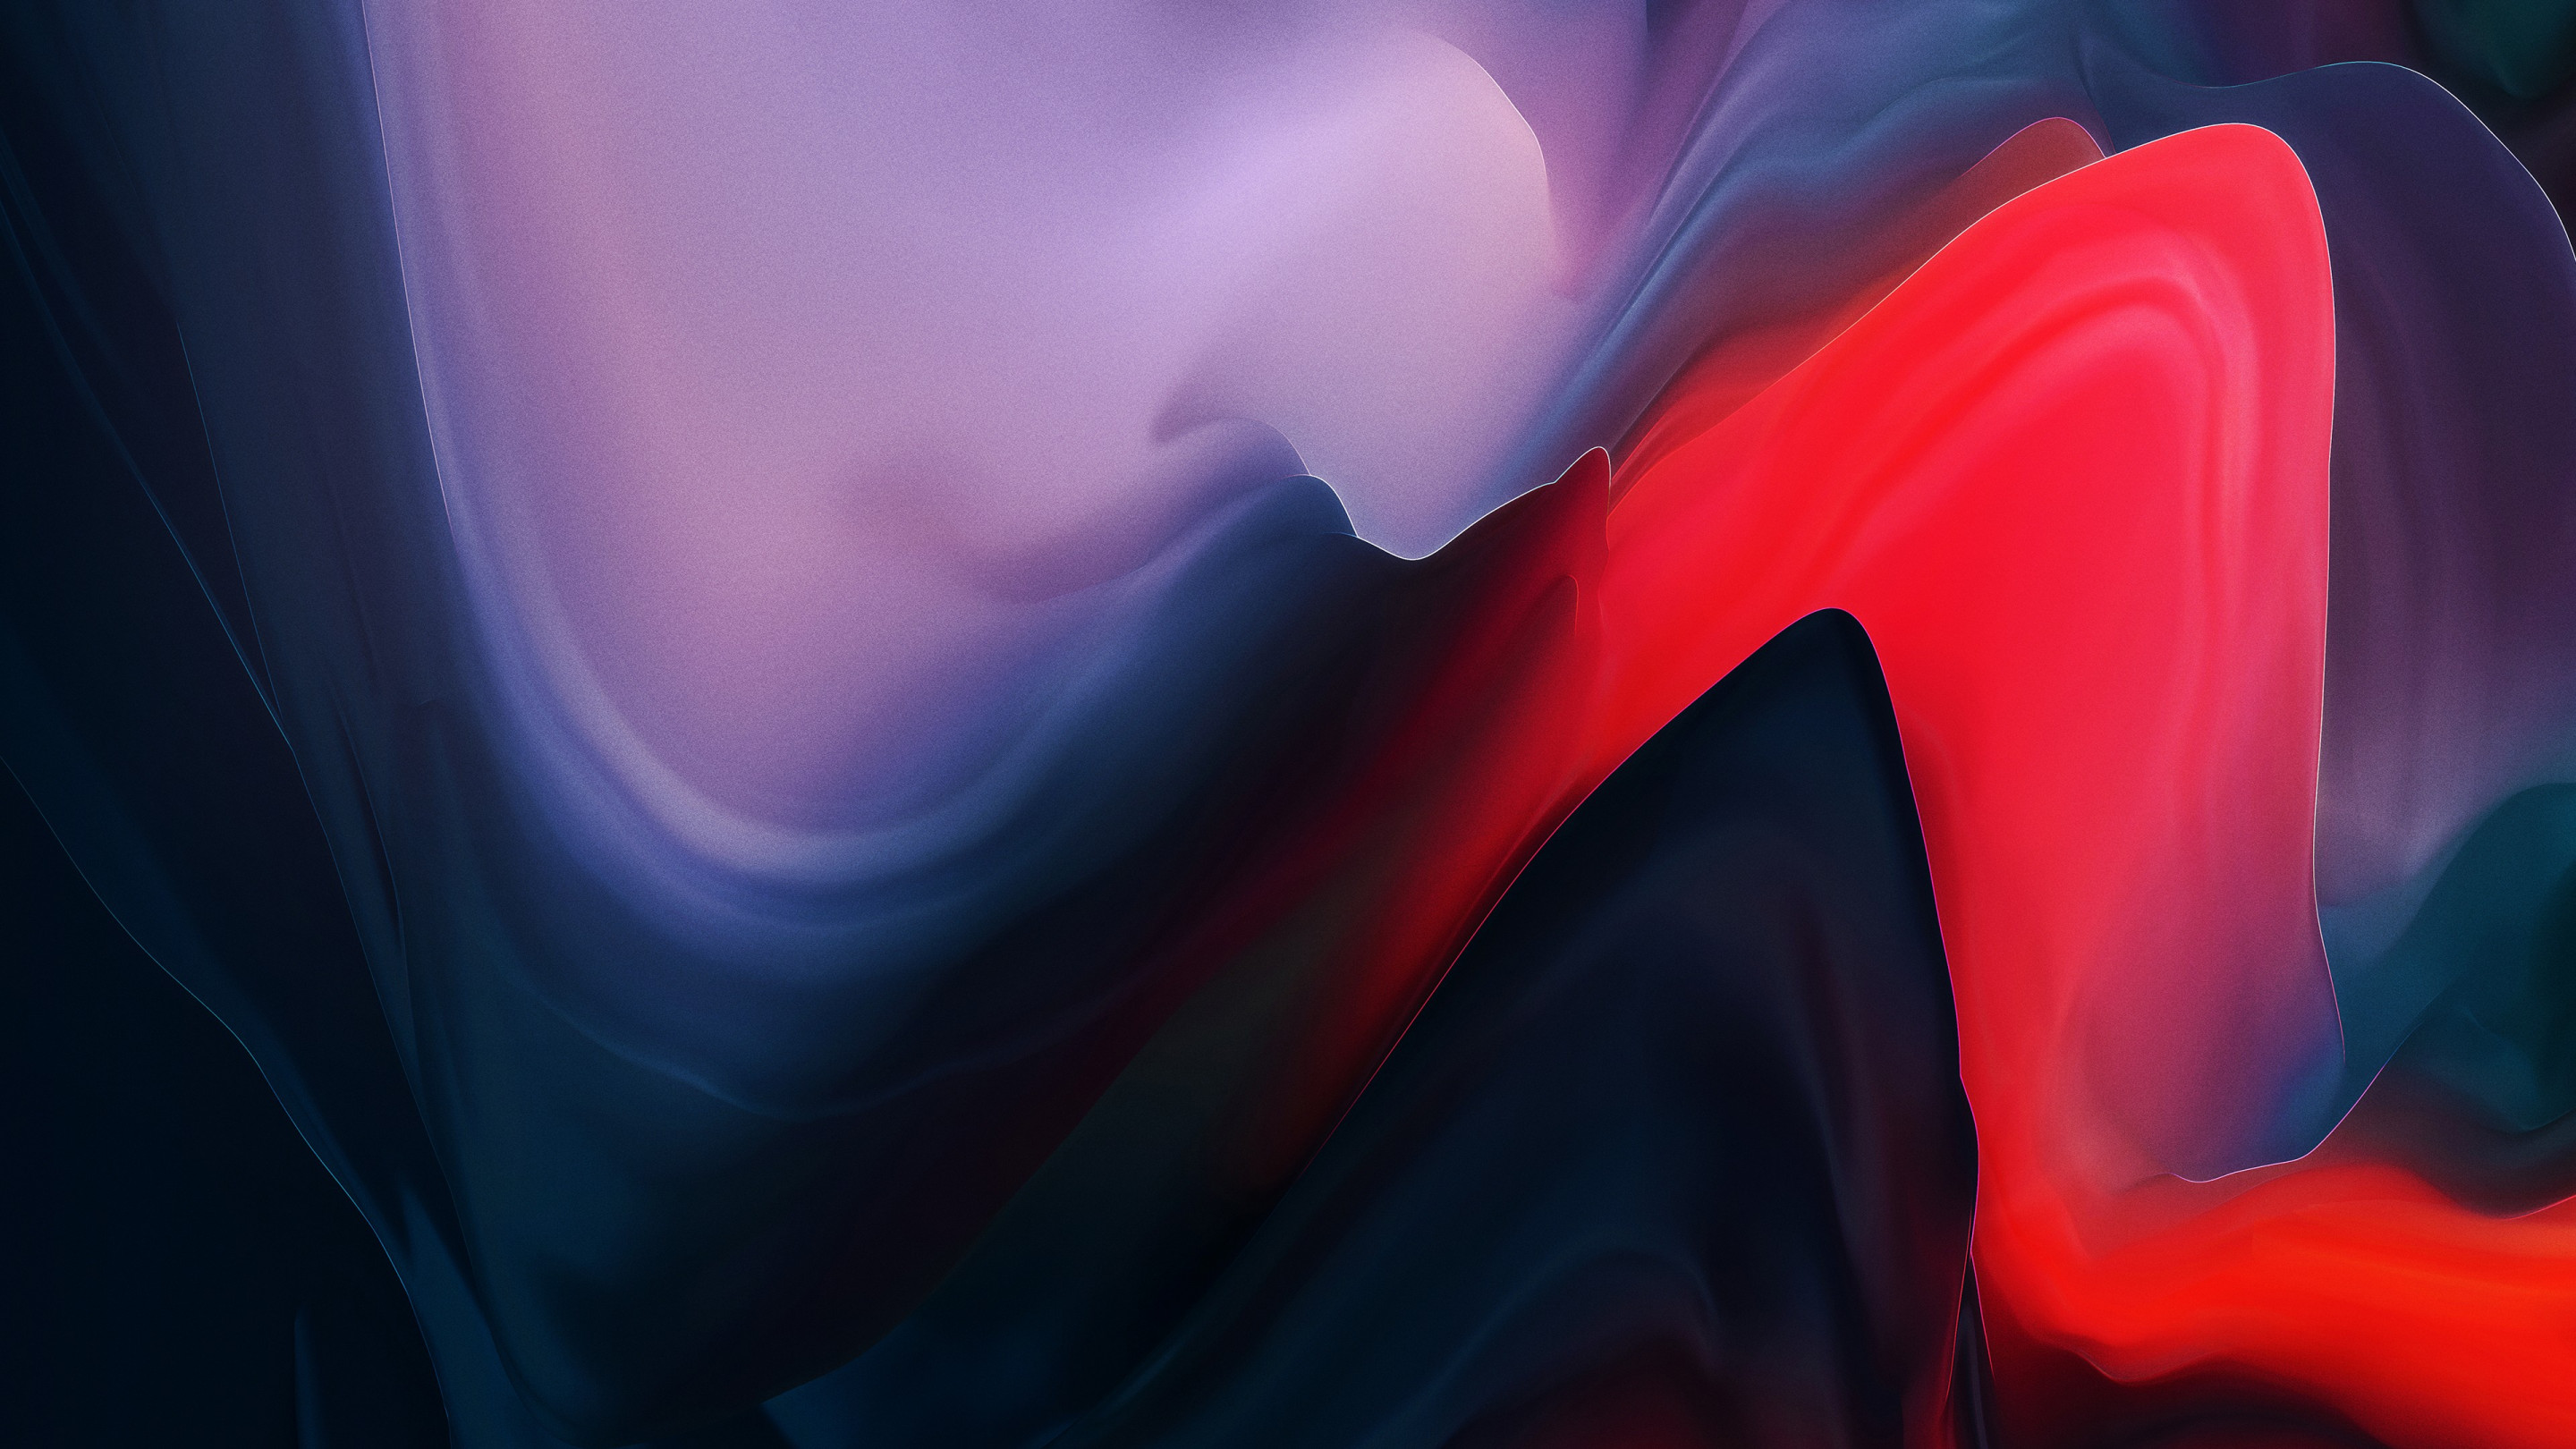 The Abstract from OnePlus 6T wallpaper 2880x1620